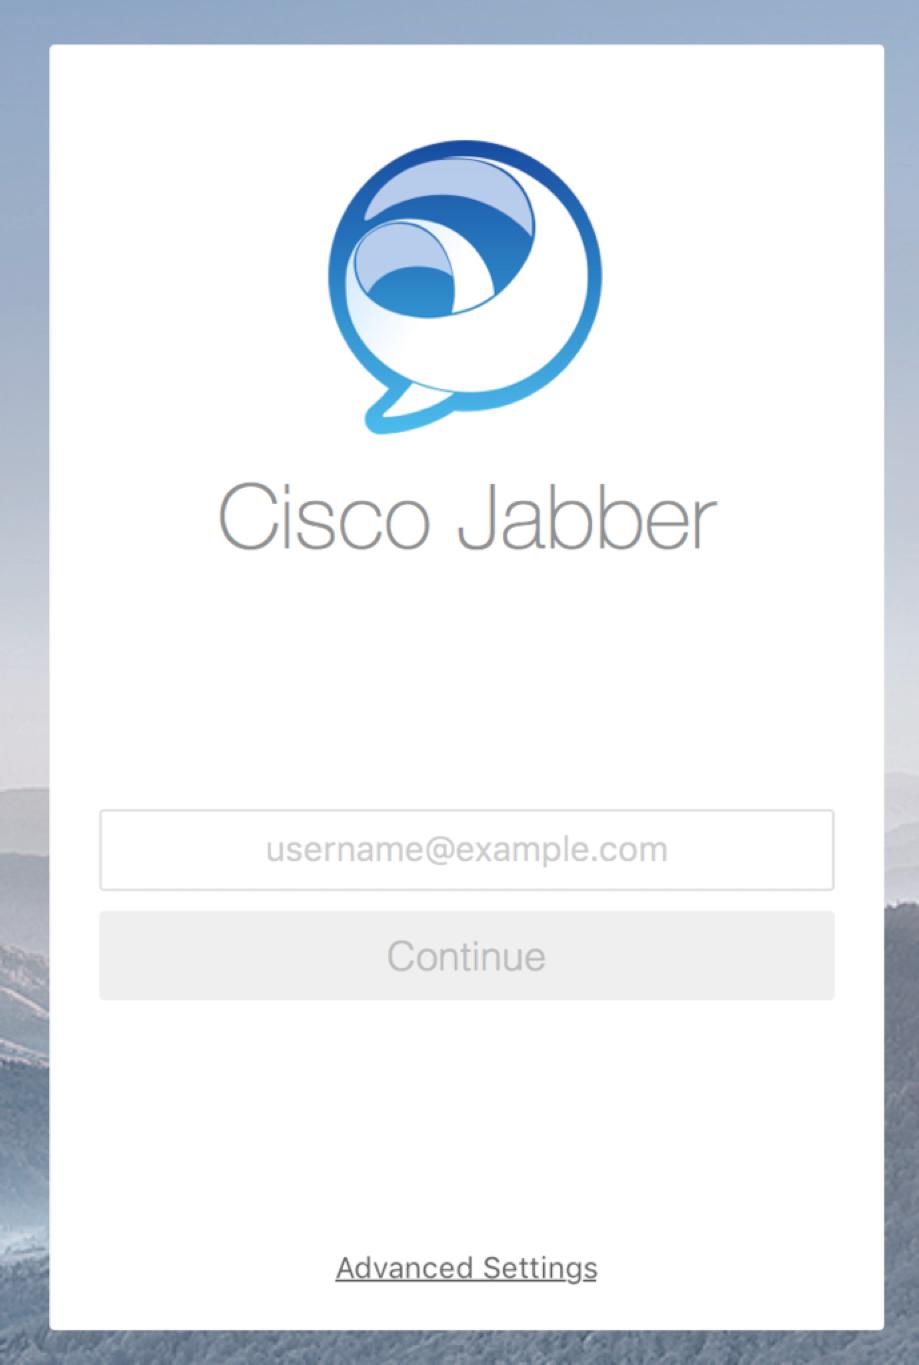 Cisco Jabber User Guide for Windows Cisco Jabber is a unified communication tool to manage phone calls, contacts, voicemail and instant messaging, and your availability status via a software